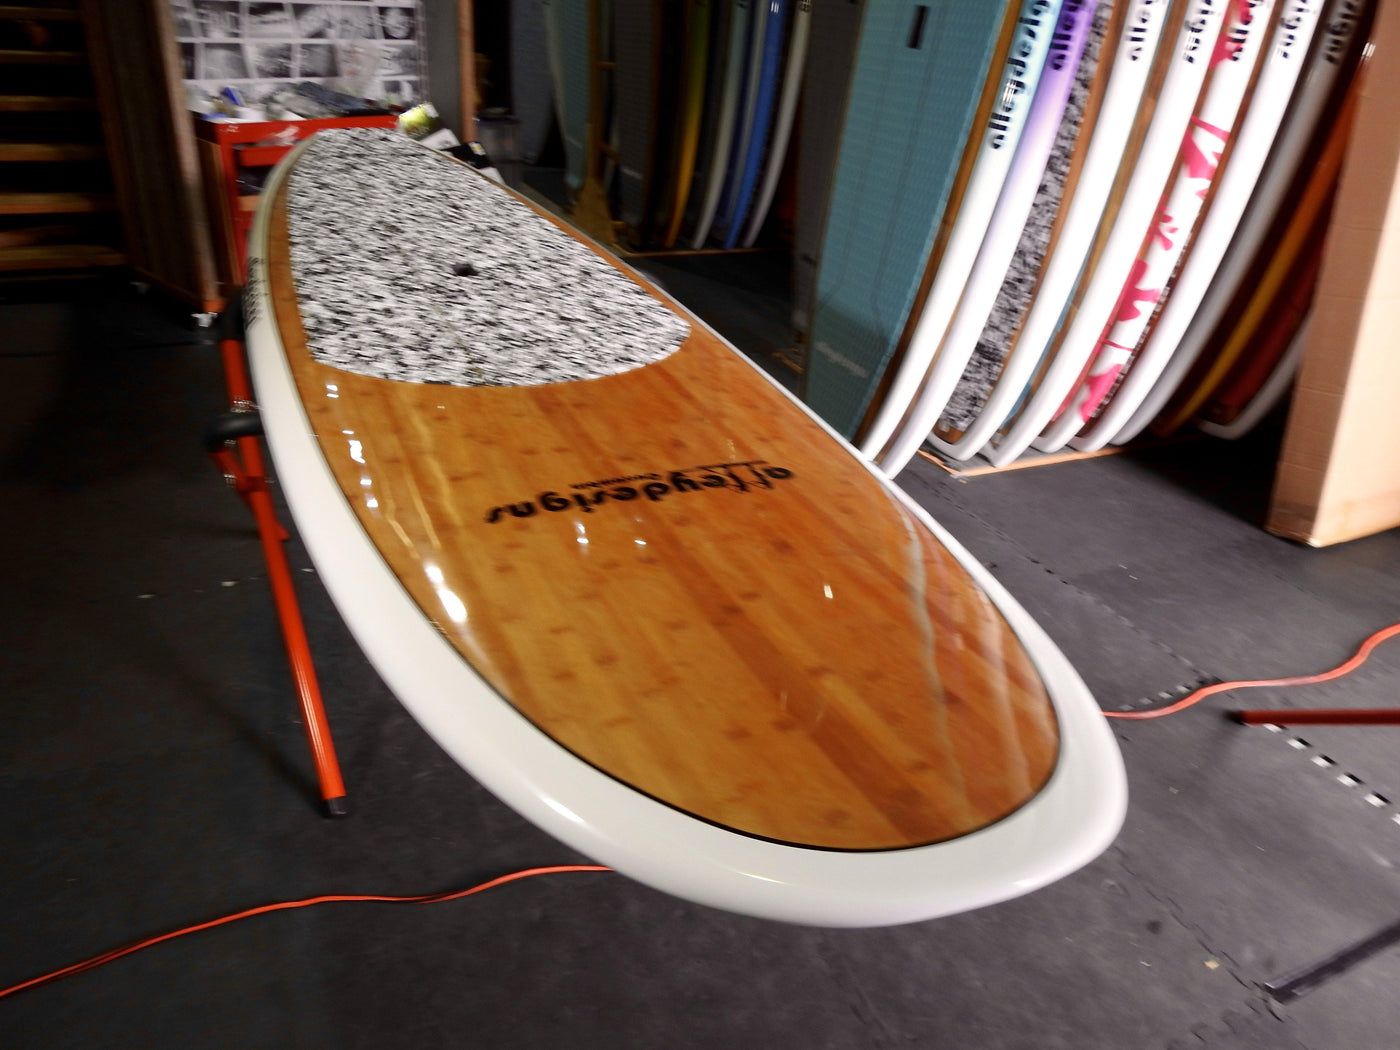 10'6" x 32" Bamboo Classic & White Alleydesigns SUP @11kg - Alleydesigns  Pty Ltd                                             ABN: 44165571264